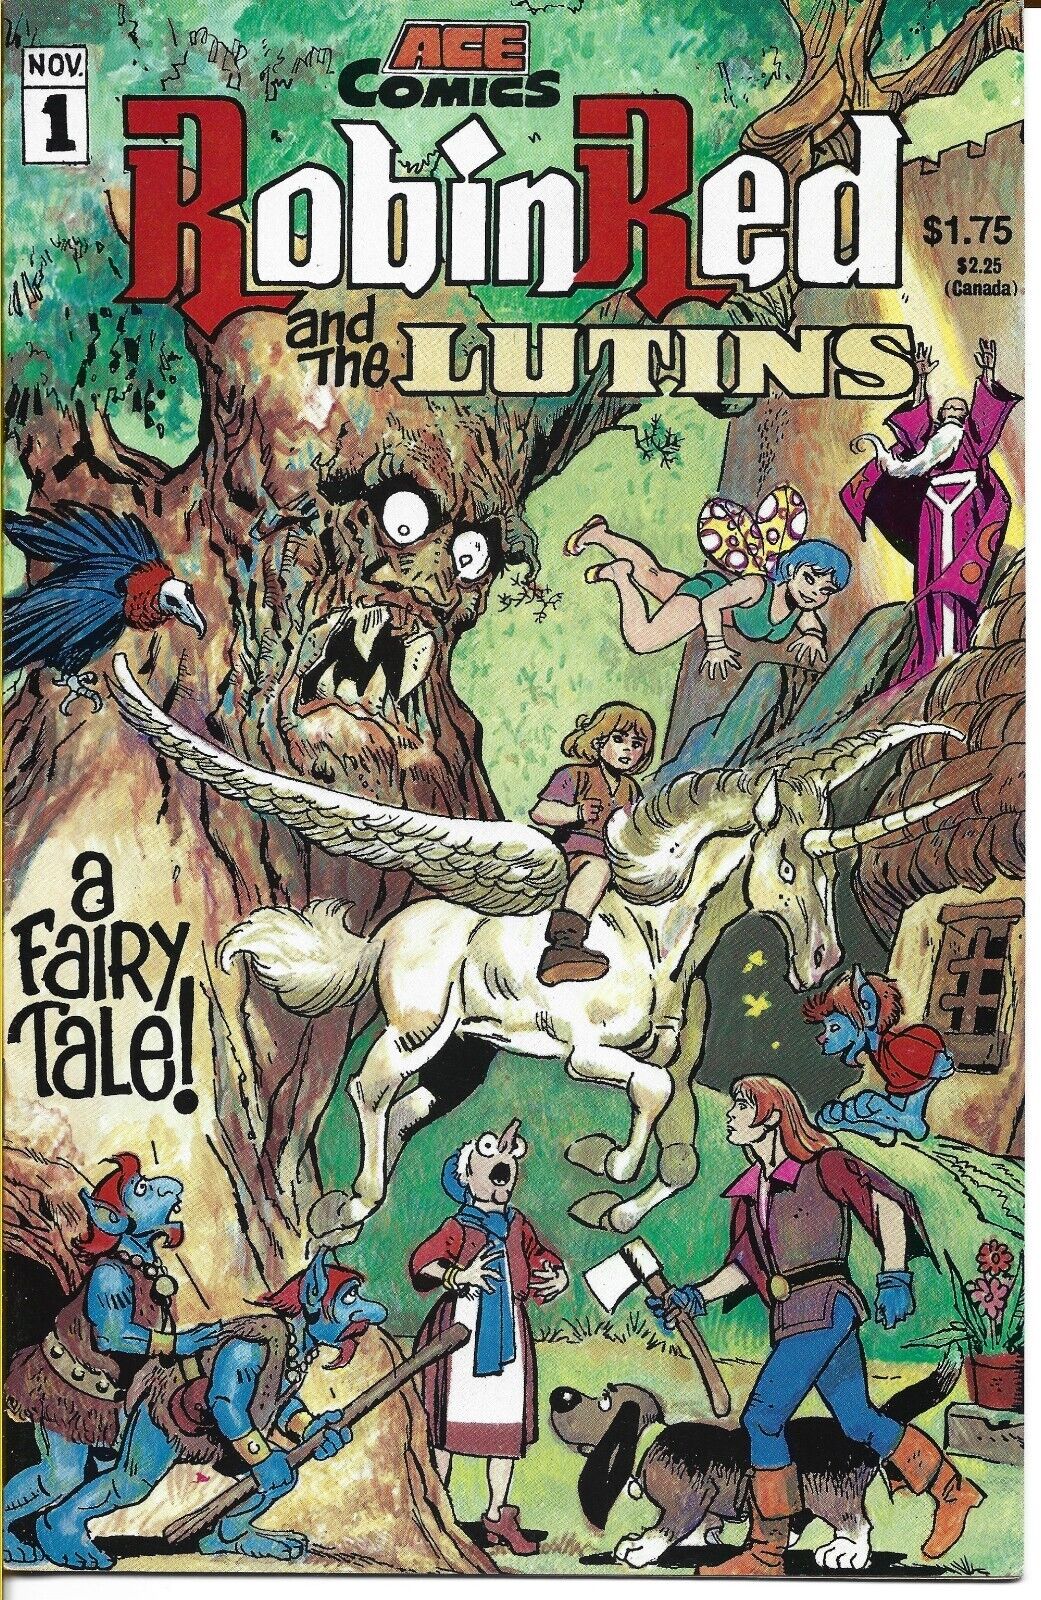 ROBIN RED AND THE LUTINS #1 ACE COMICS BAGGED AND BOARDED